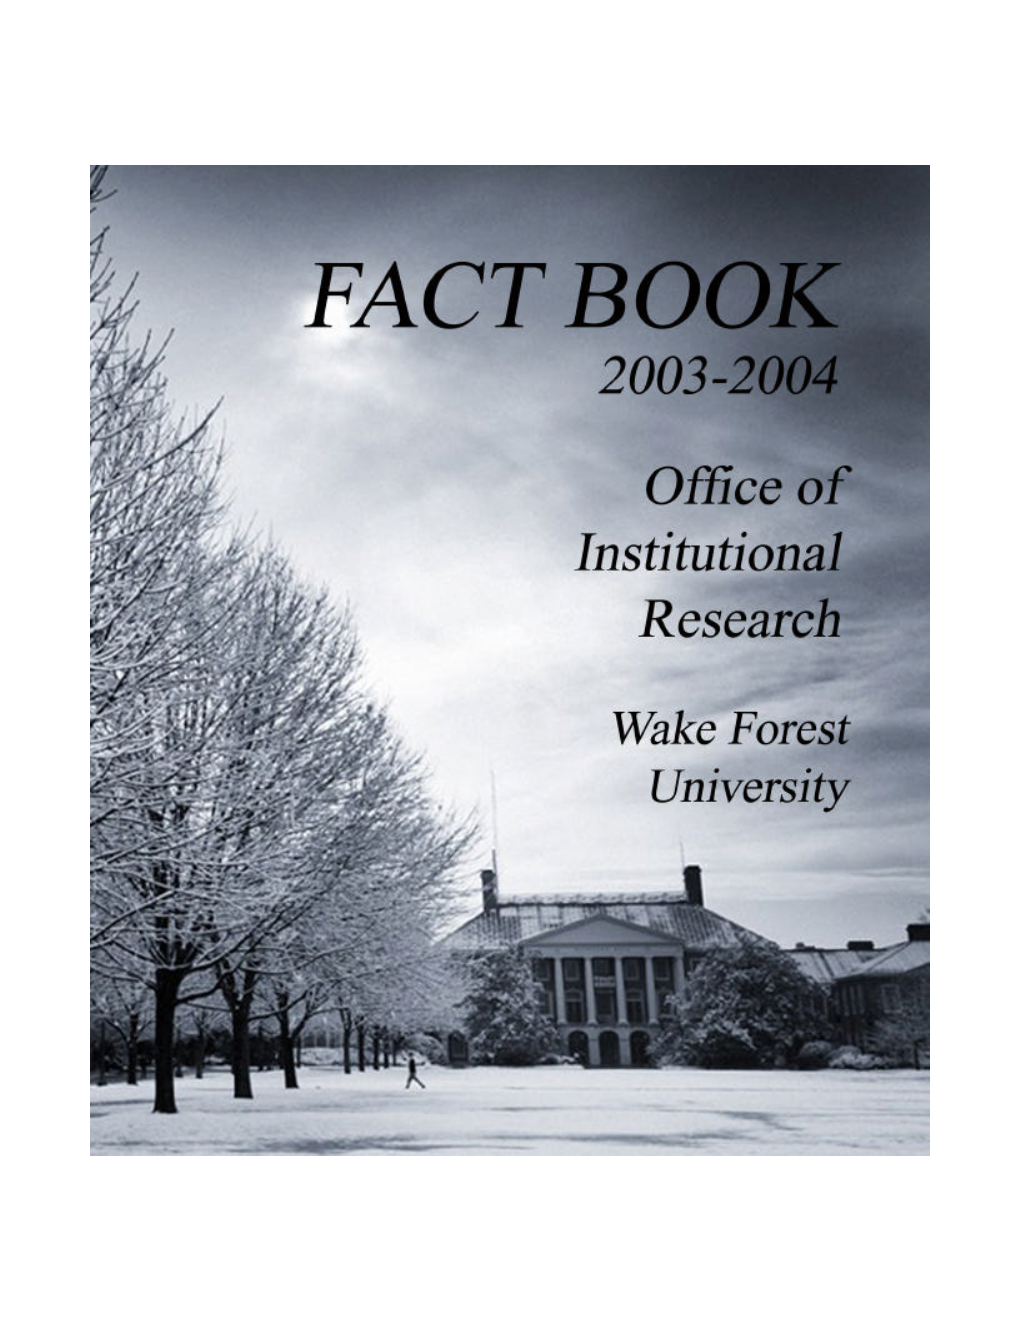 Wake Forest University Fact Book 2003-2004 1 Both Sexes and from a Wide Range of Backgrounds --- Racial, Ethnic, Religious, Geographical, Socioeconomic, and Cultural